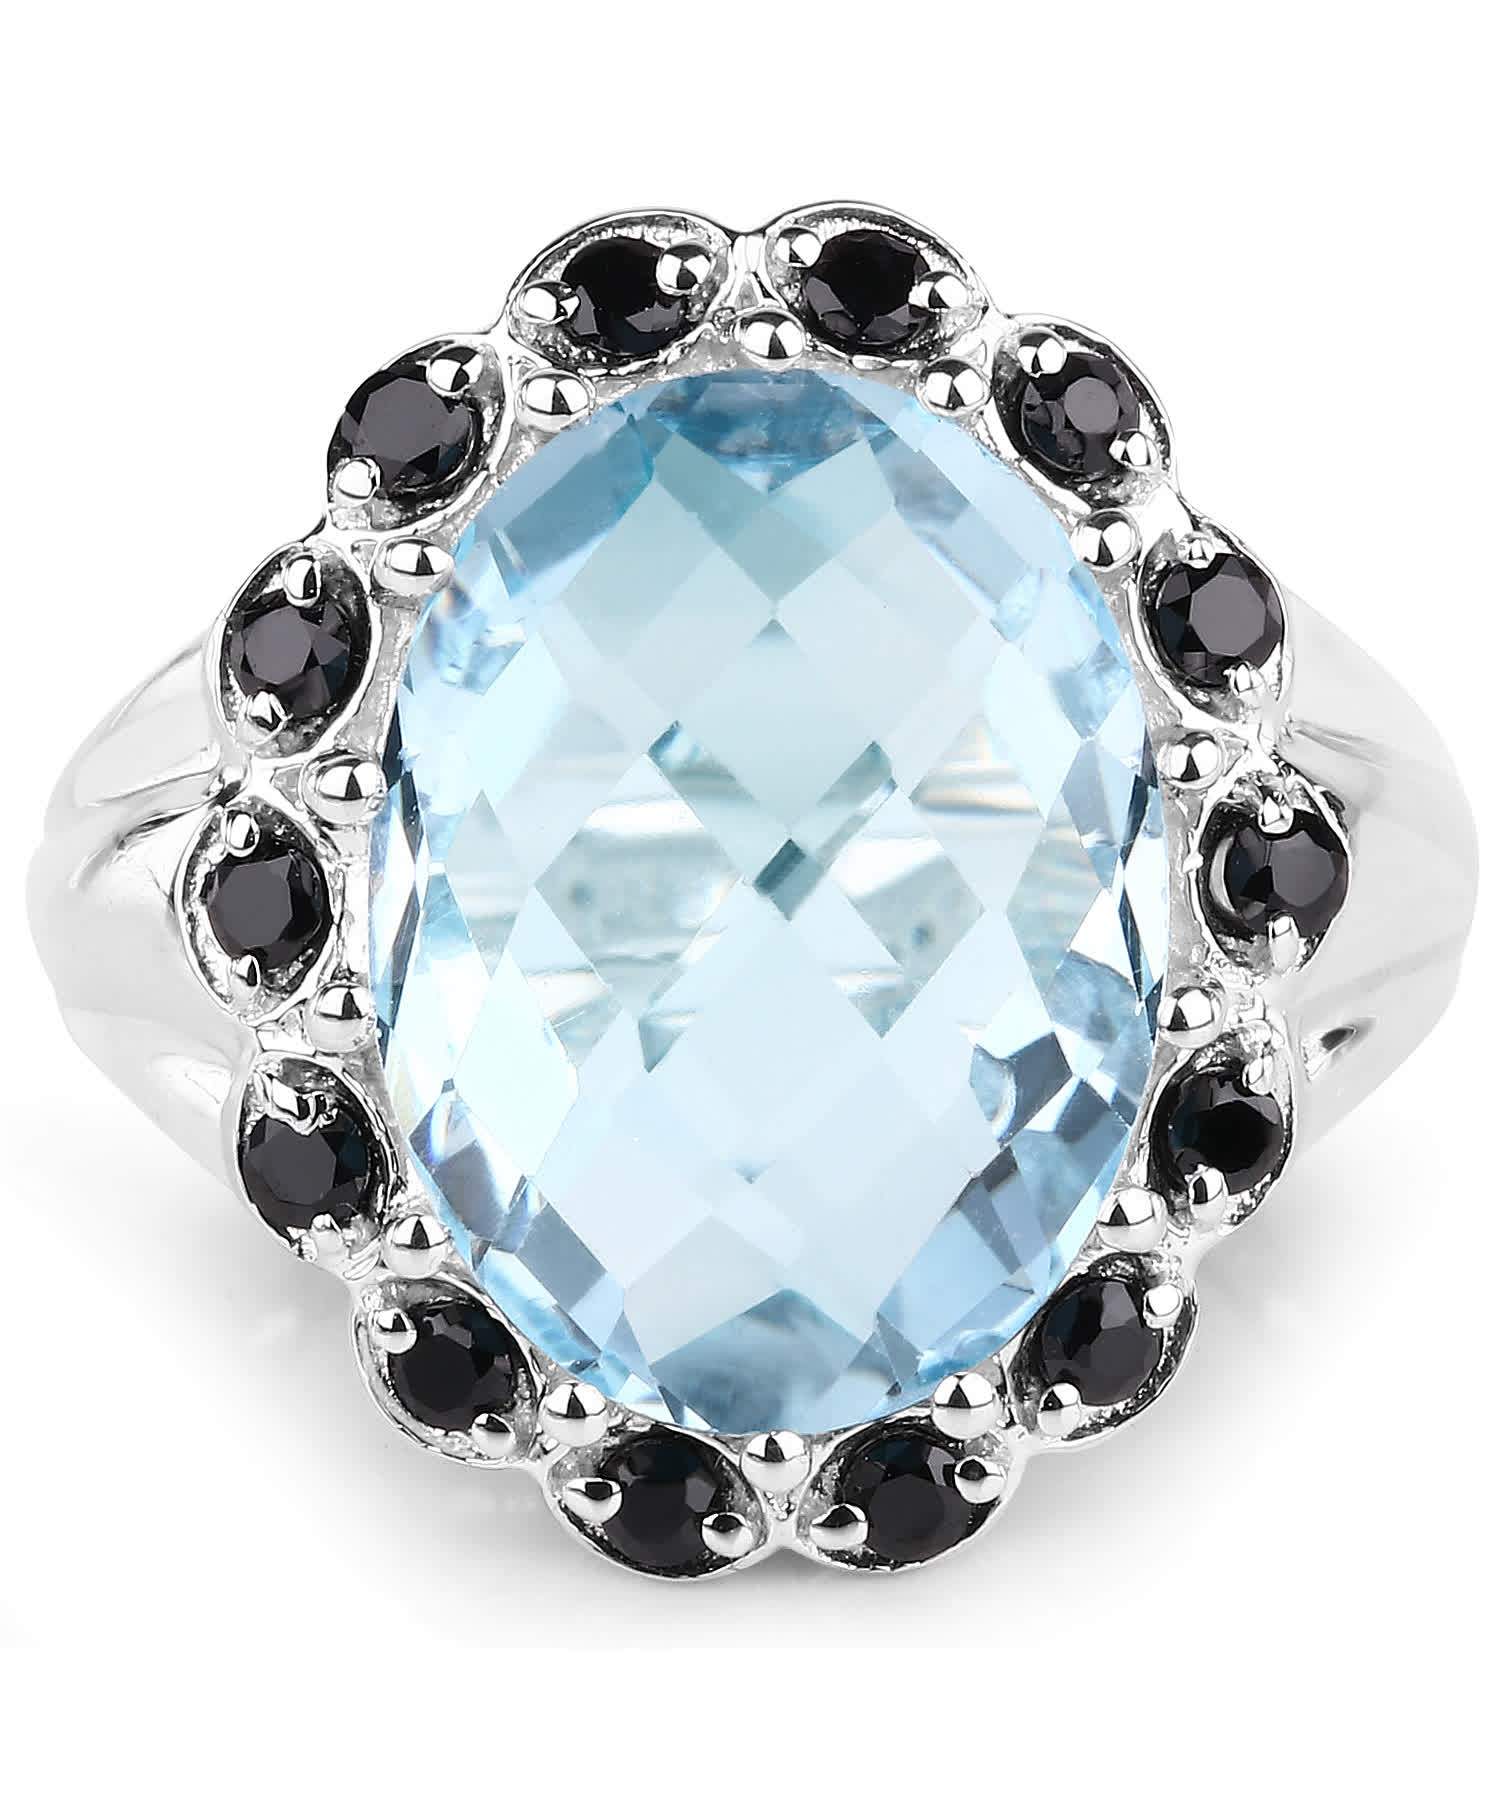 12.49ctw Natural Swiss Blue Topaz and Black Spinel Rhodium Plated 925 Sterling Silver Halo Cocktail Ring View 3